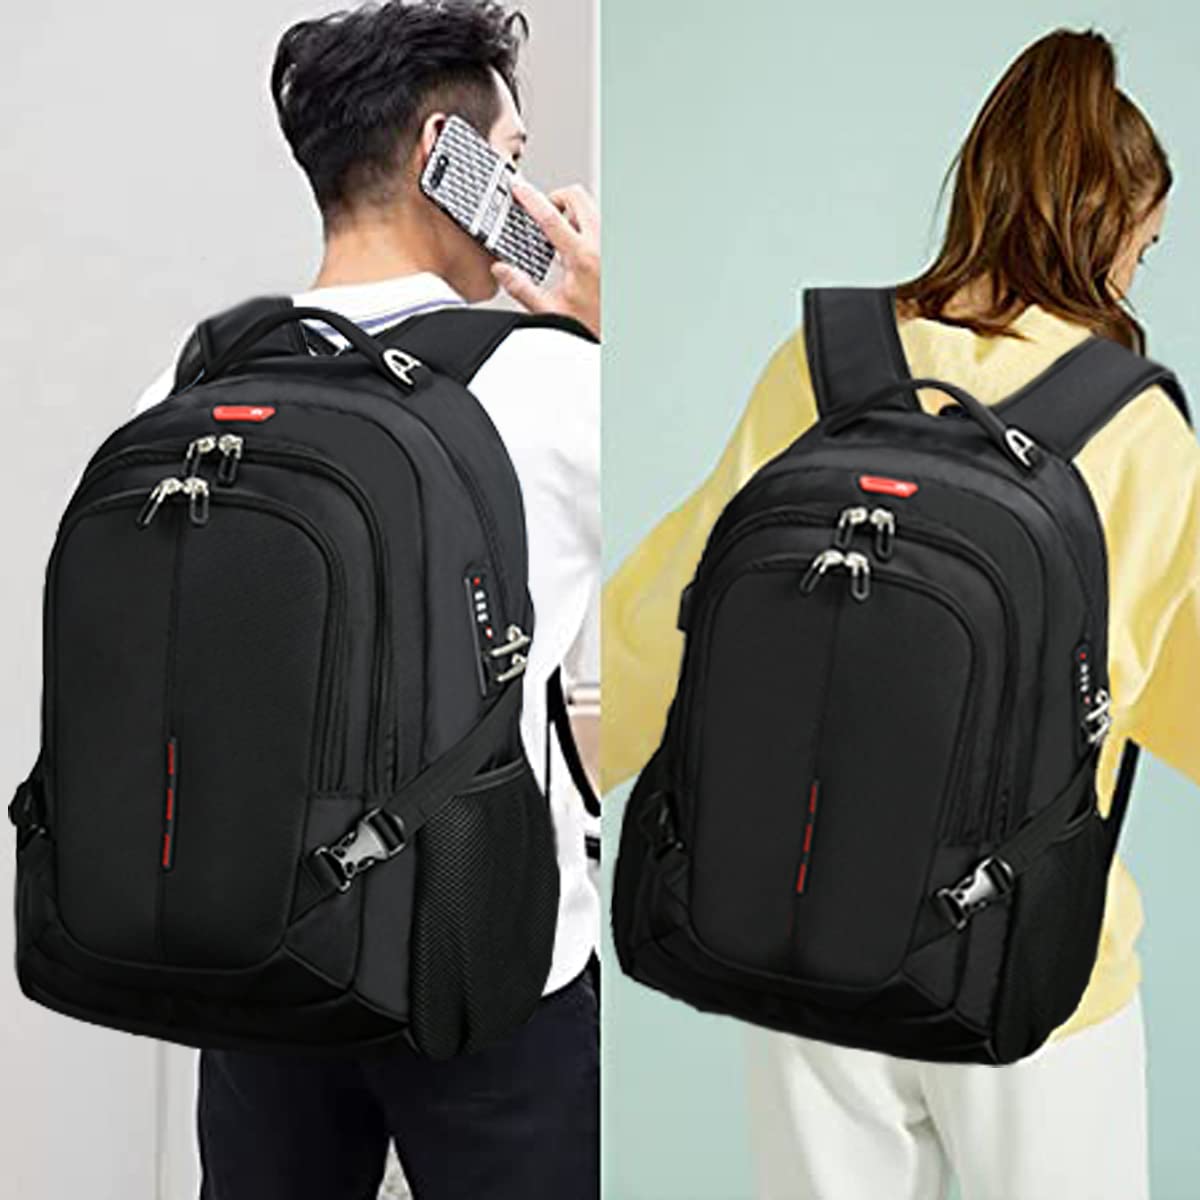 Sowaovut Travel Laptop Backpack Anti-Theft Bag with usb Charging Port and Password Lock Fit 15.6 Inch Laptops for Men Women